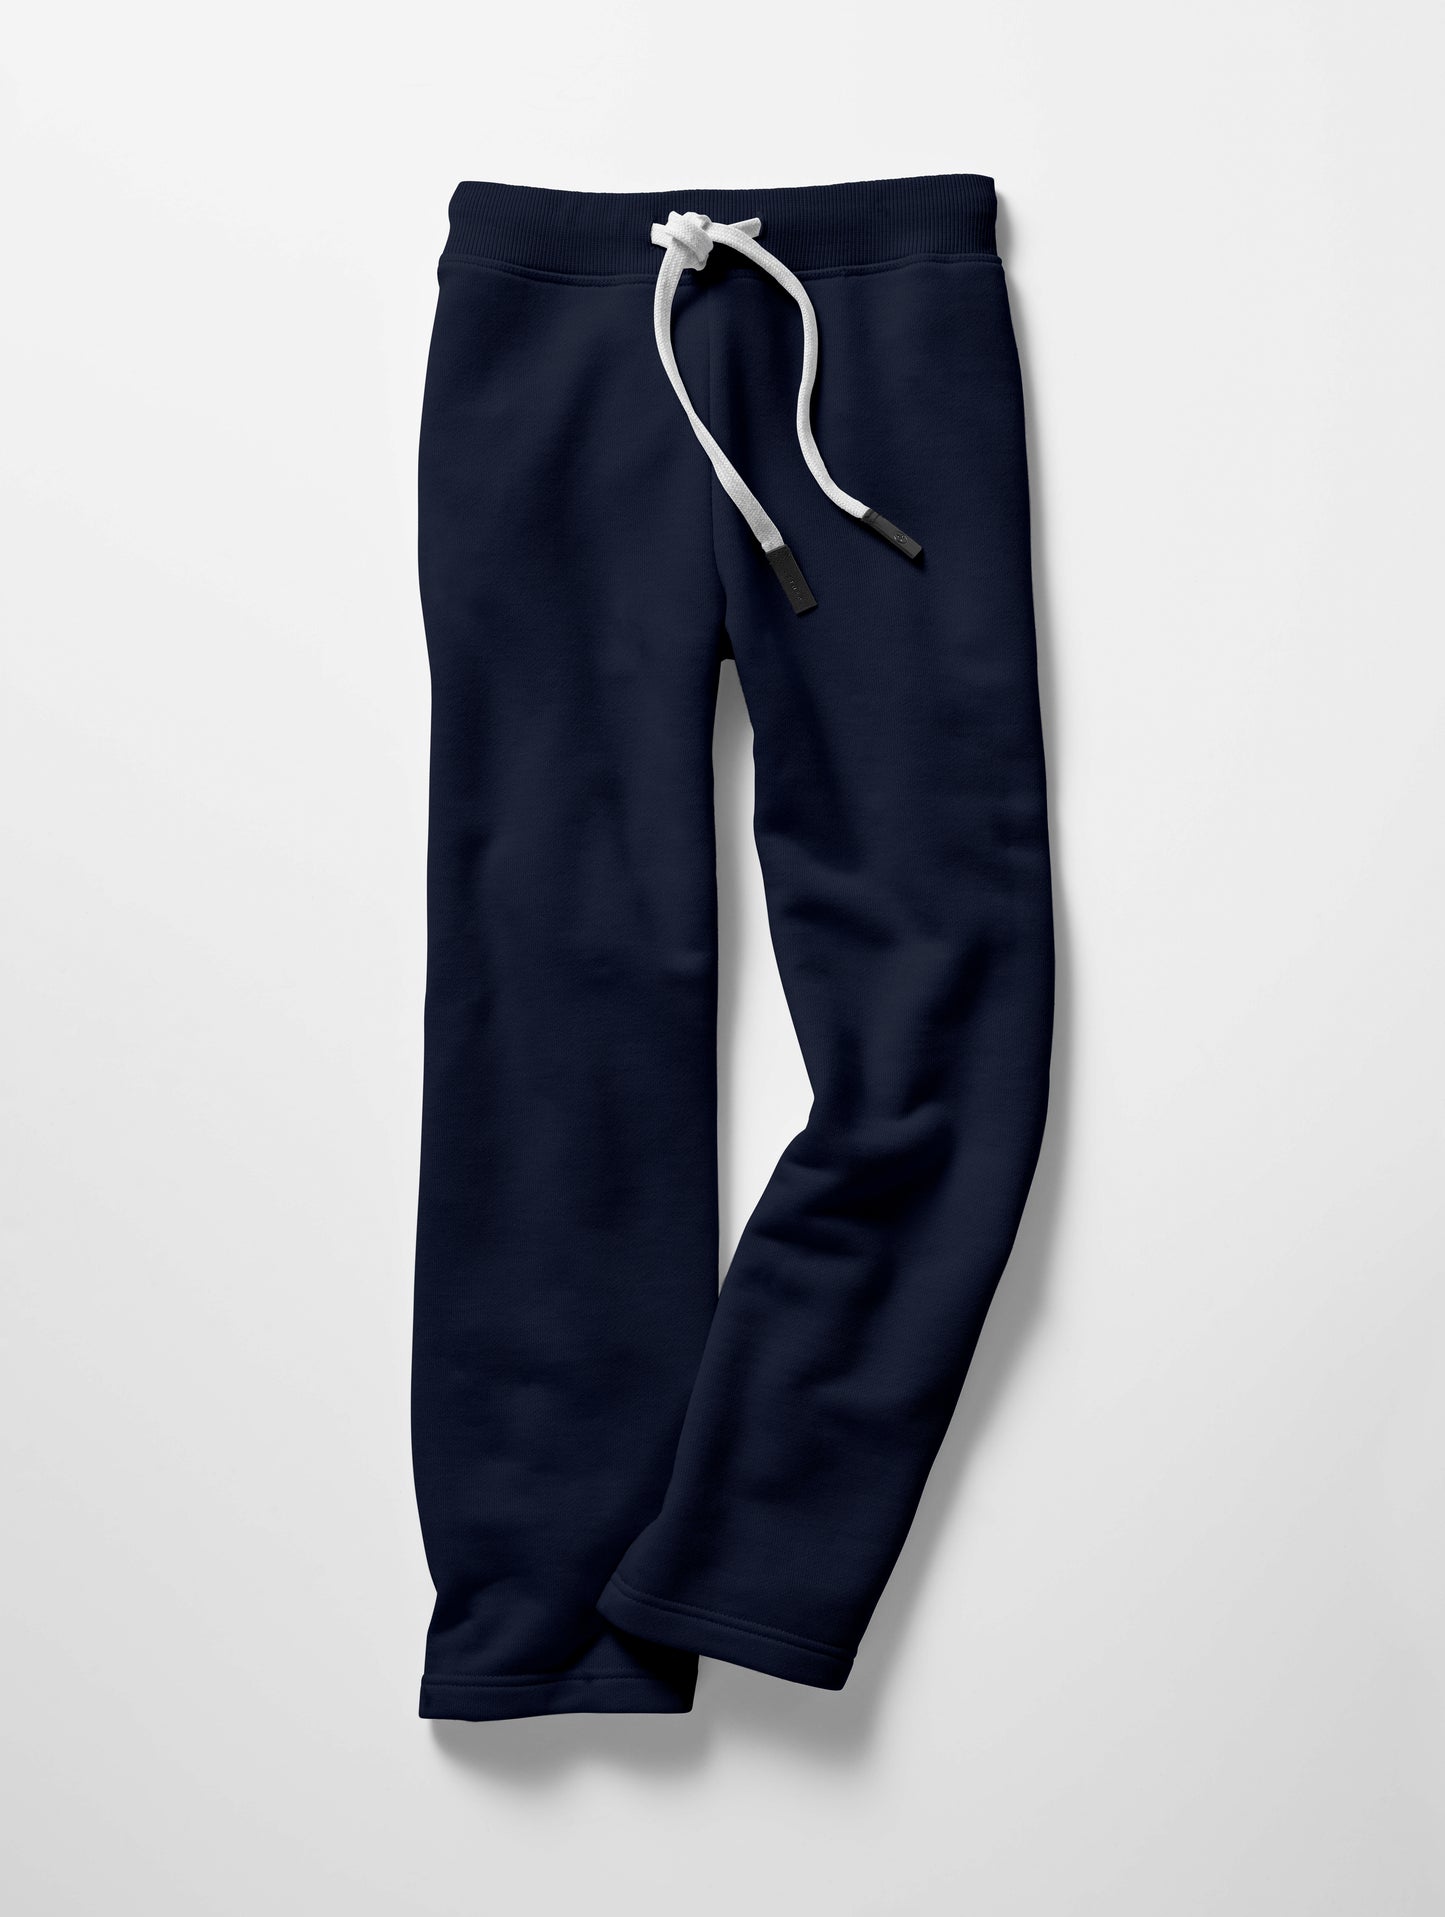 navy cropped sweatpants for women